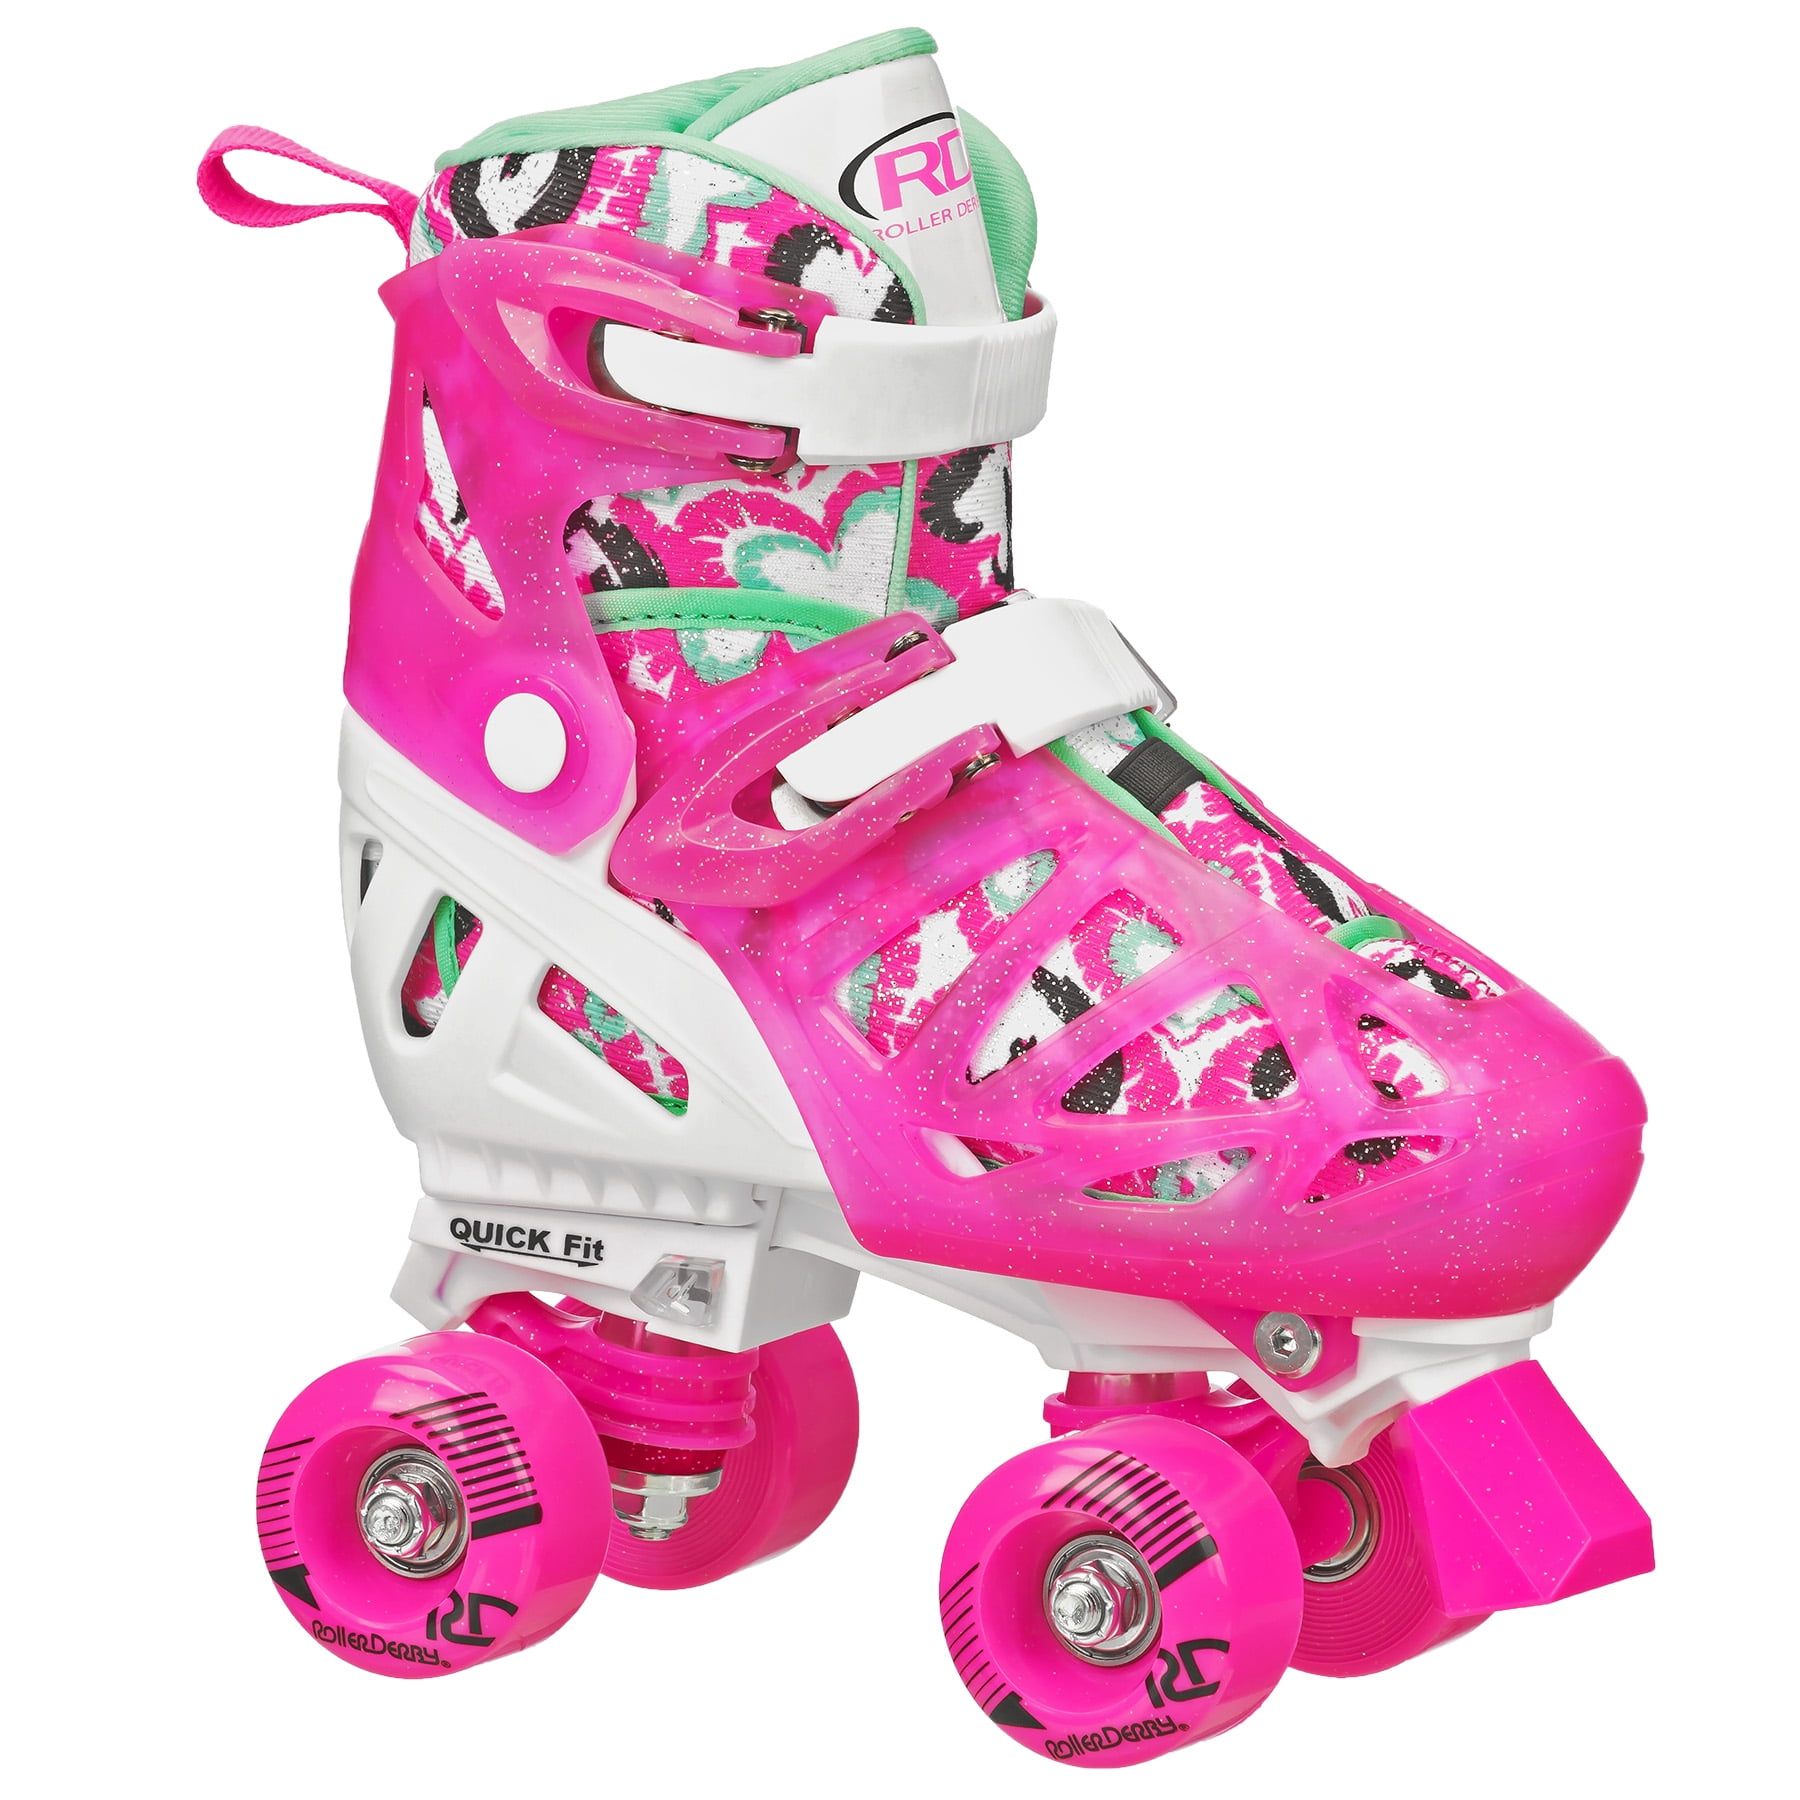 Small Roller Derby Fun Roll Girl's Jr Adjustable Roller Skate Pink/Yellow Size 